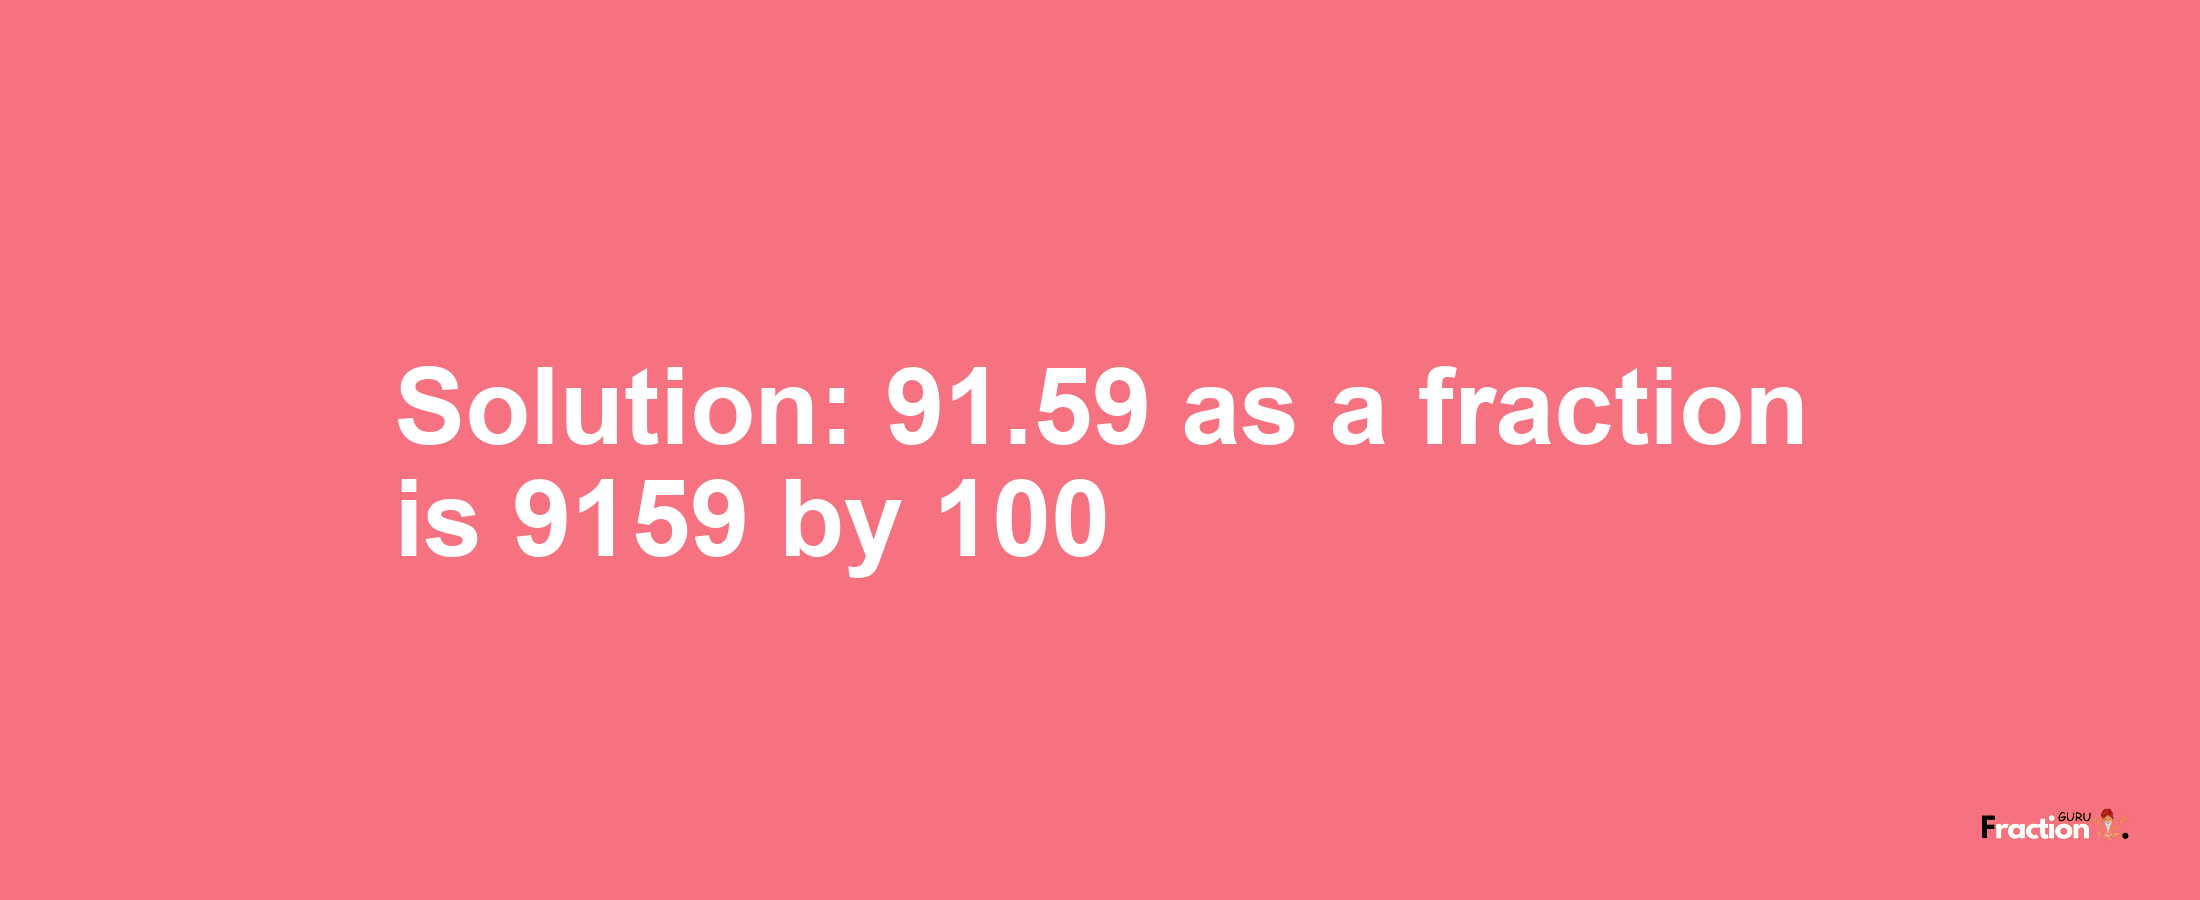 Solution:91.59 as a fraction is 9159/100